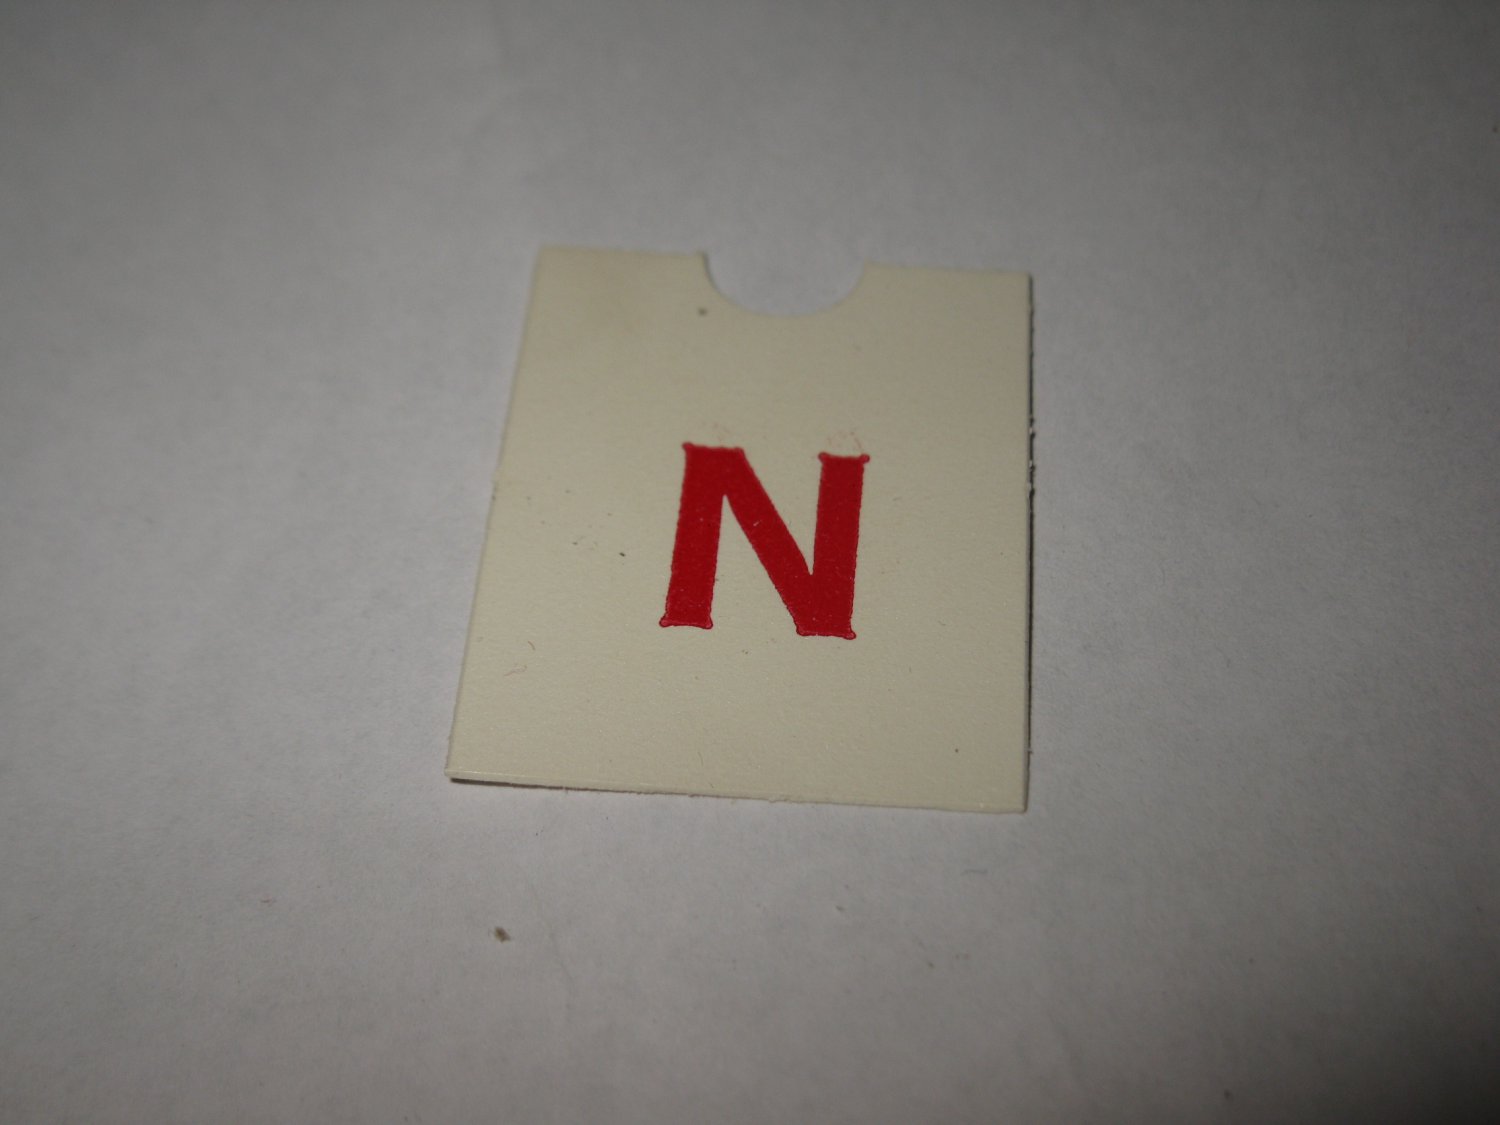 1967 4CYTE Board Game Piece: Red Letter Tab - N